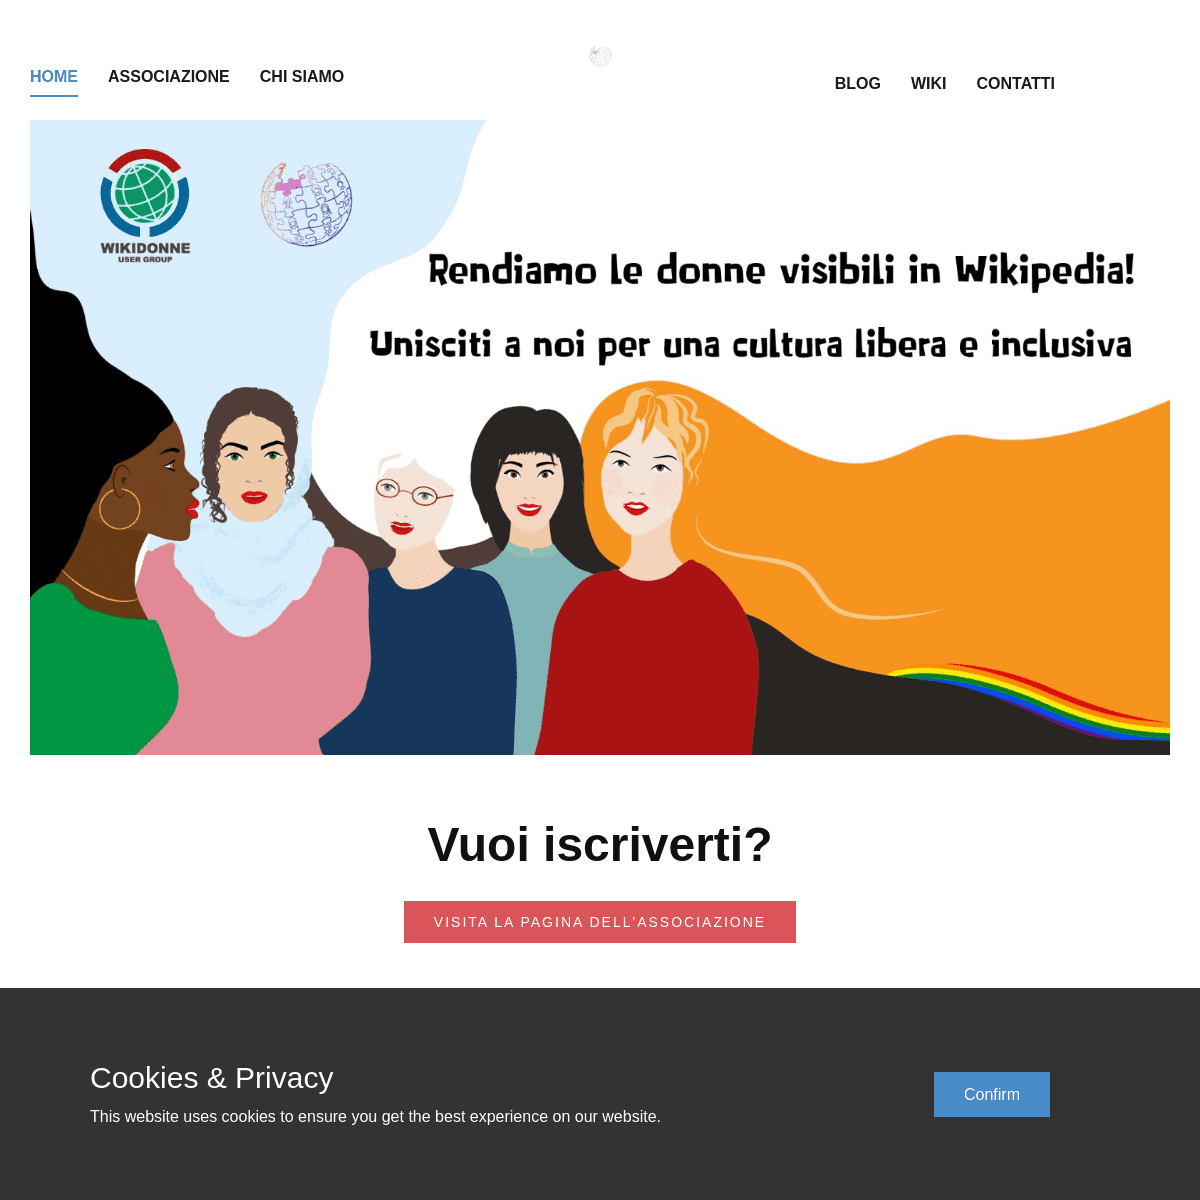 A complete backup of https://wikidonne.org